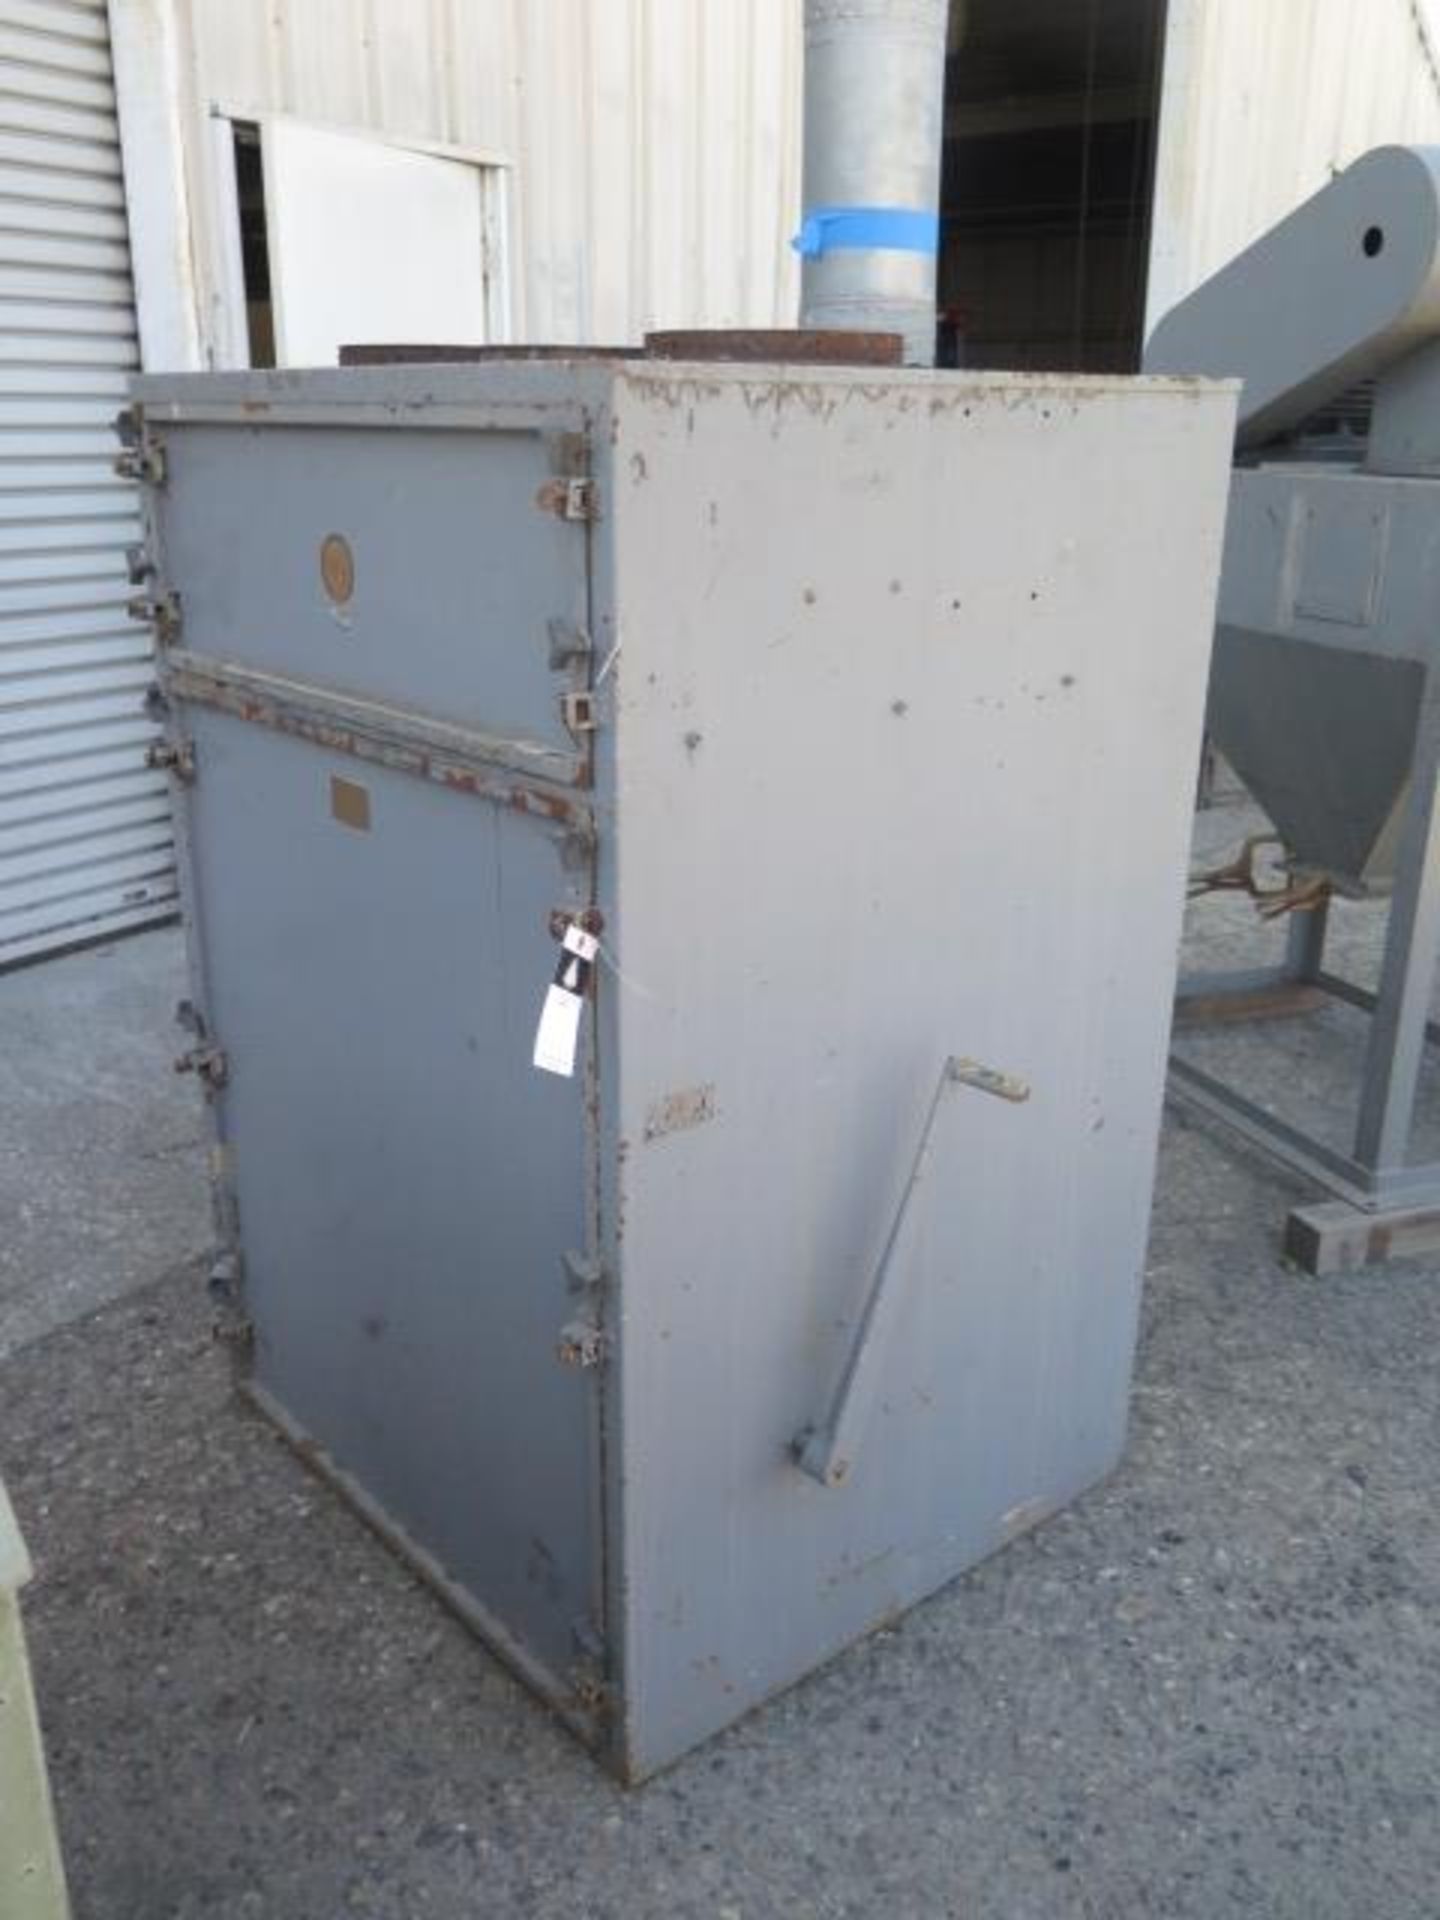 Torit mdl. 90 Dust Collector (SOLD AS-IS - NO WARRANTY) - Image 2 of 5